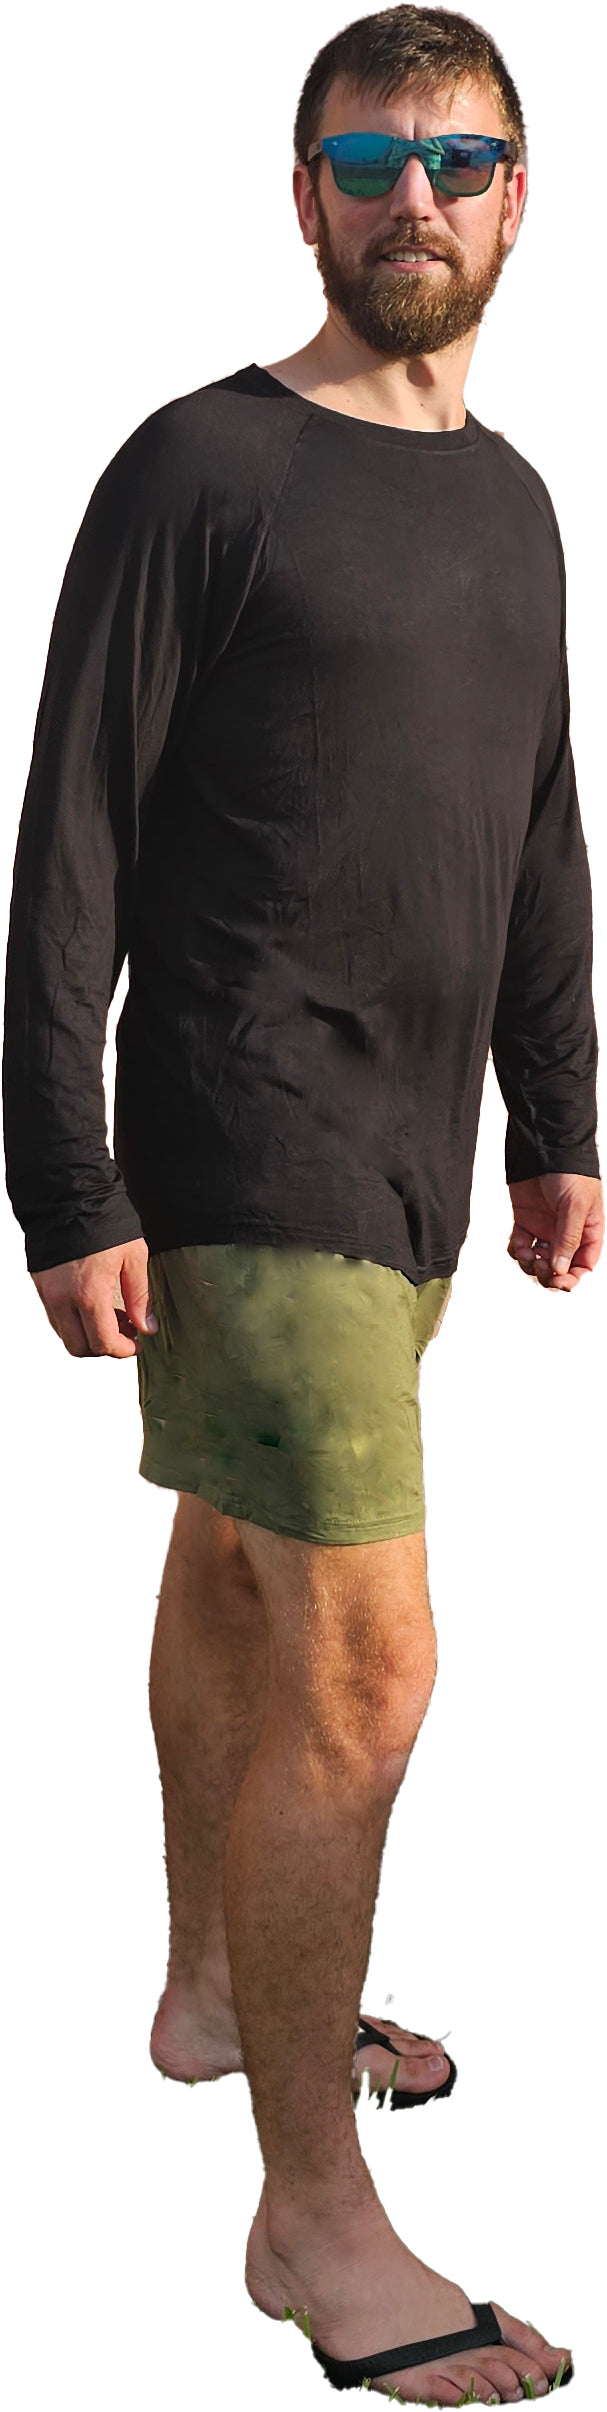 a man in a black shirt and green shorts